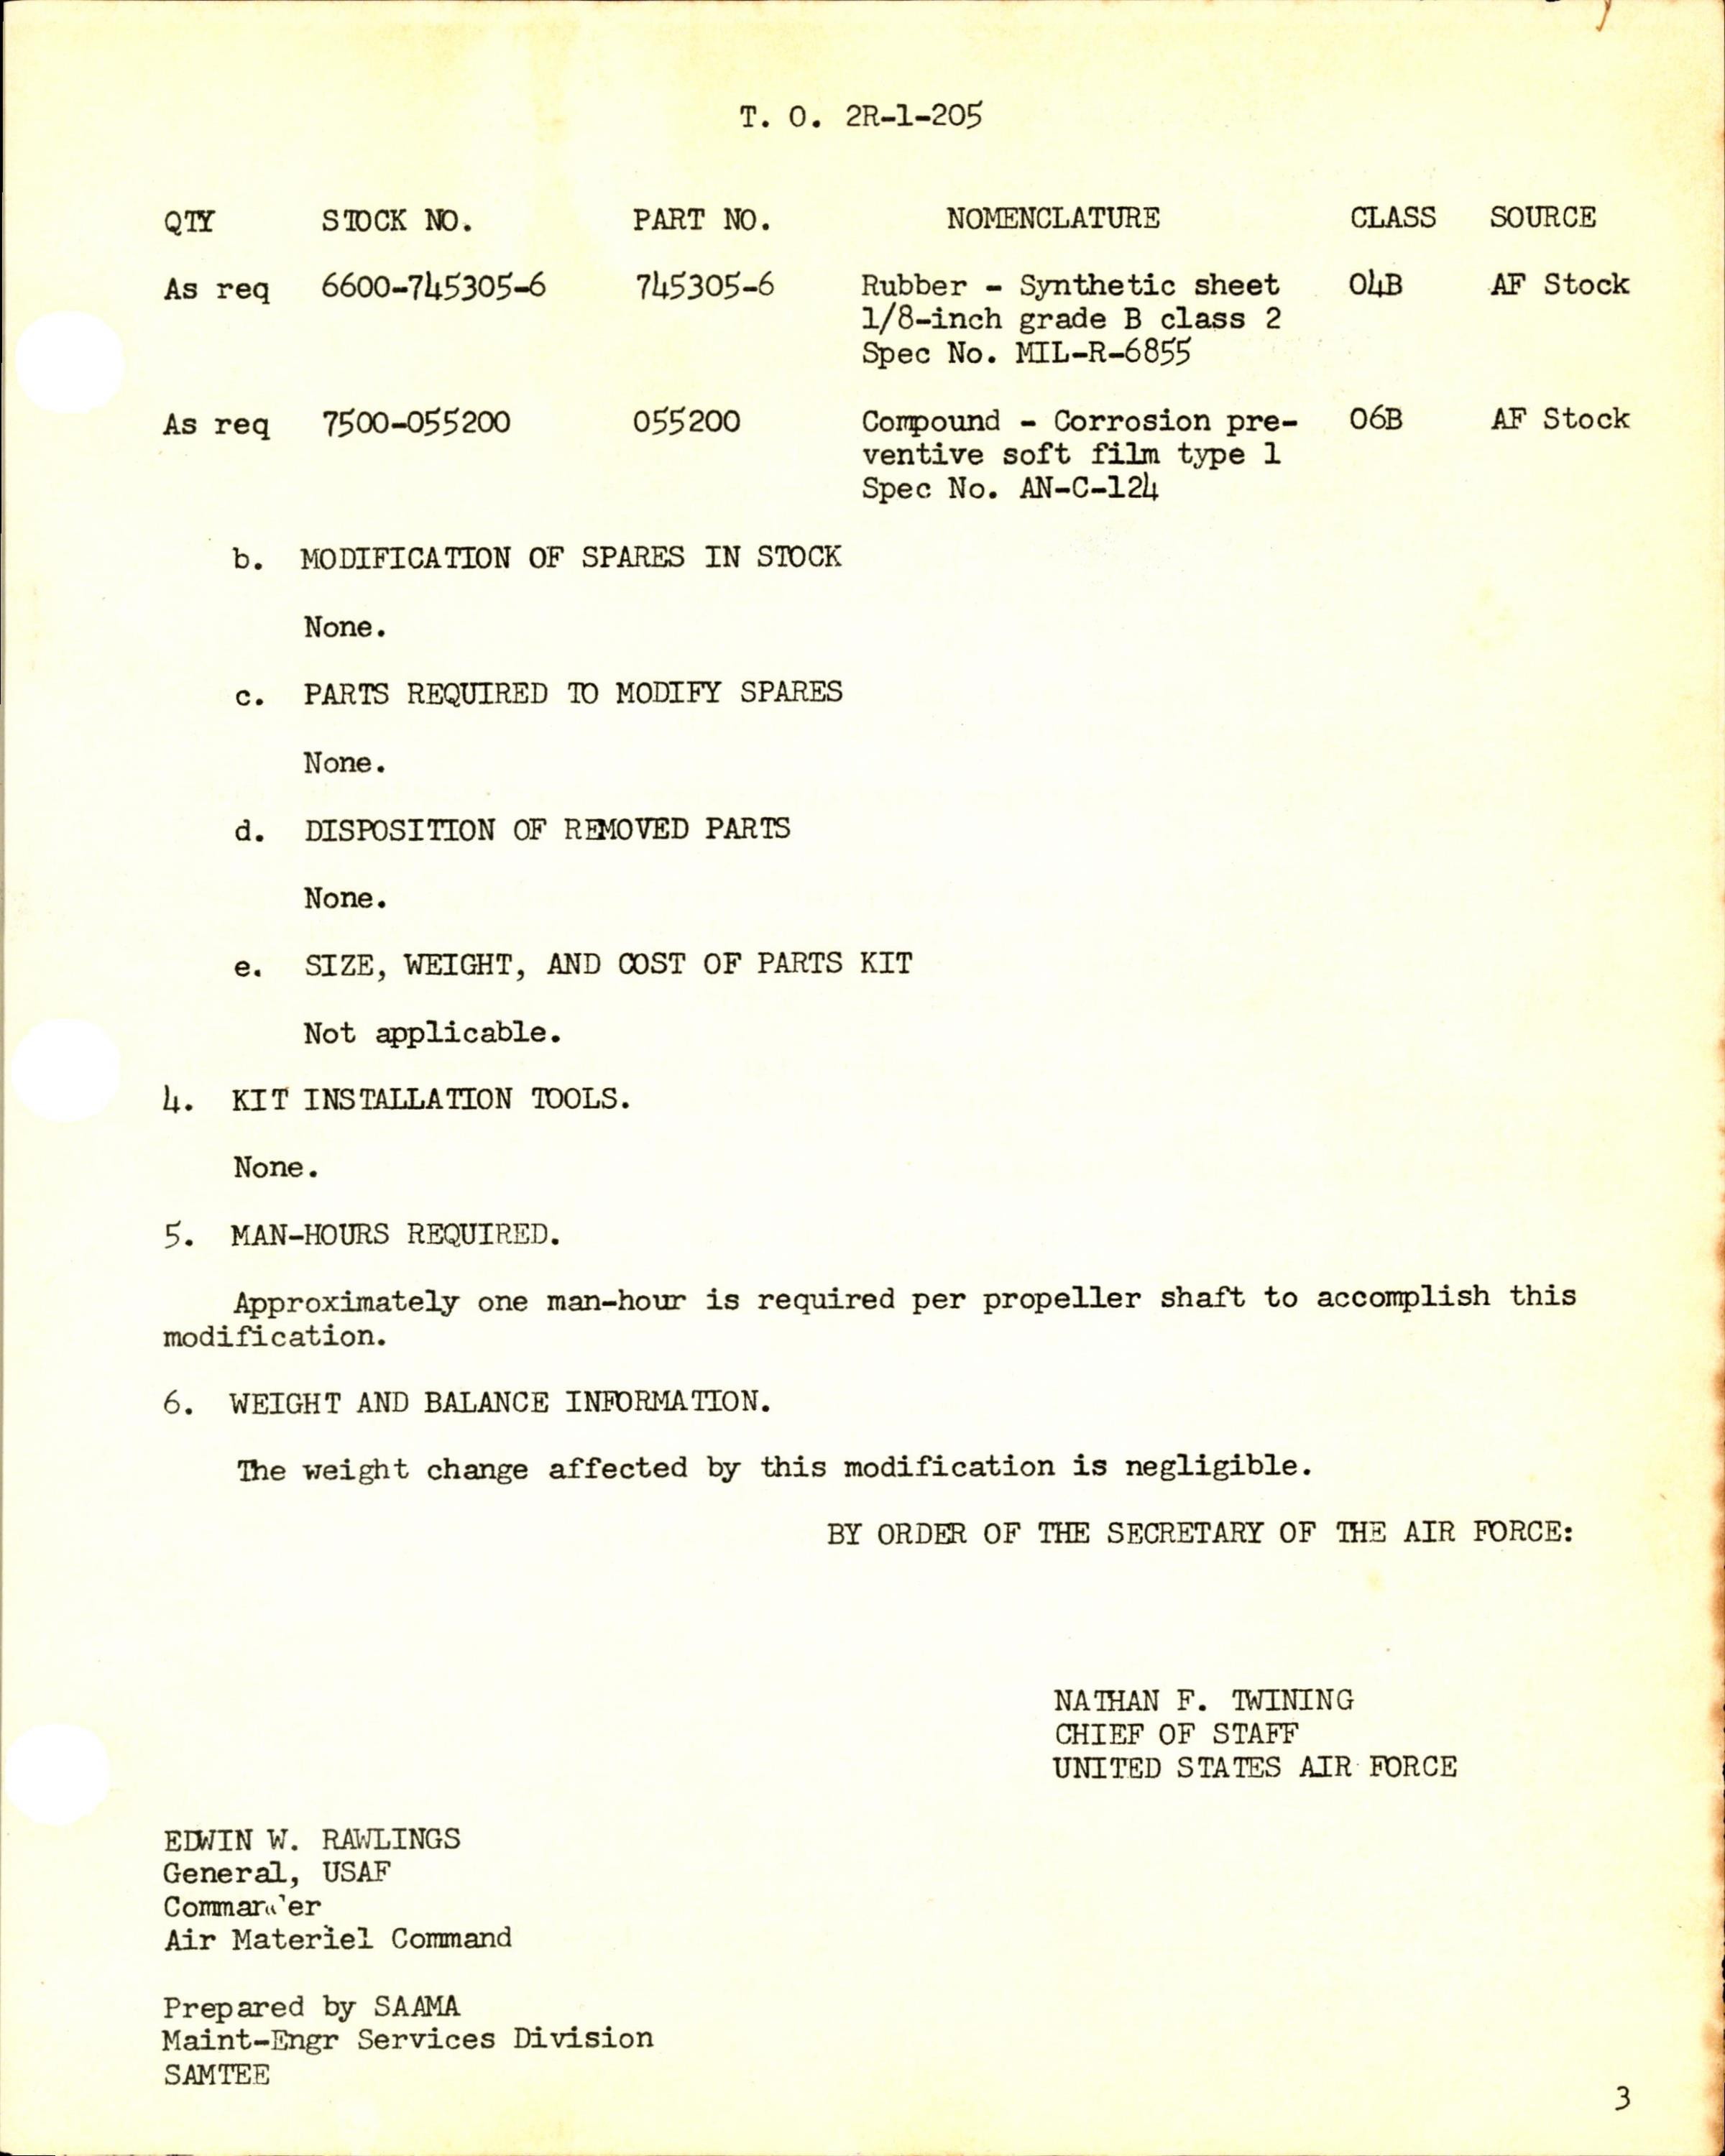 Sample page 3 from AirCorps Library document: Corrosion Preventative Treatment of Engine Propeller Shafts